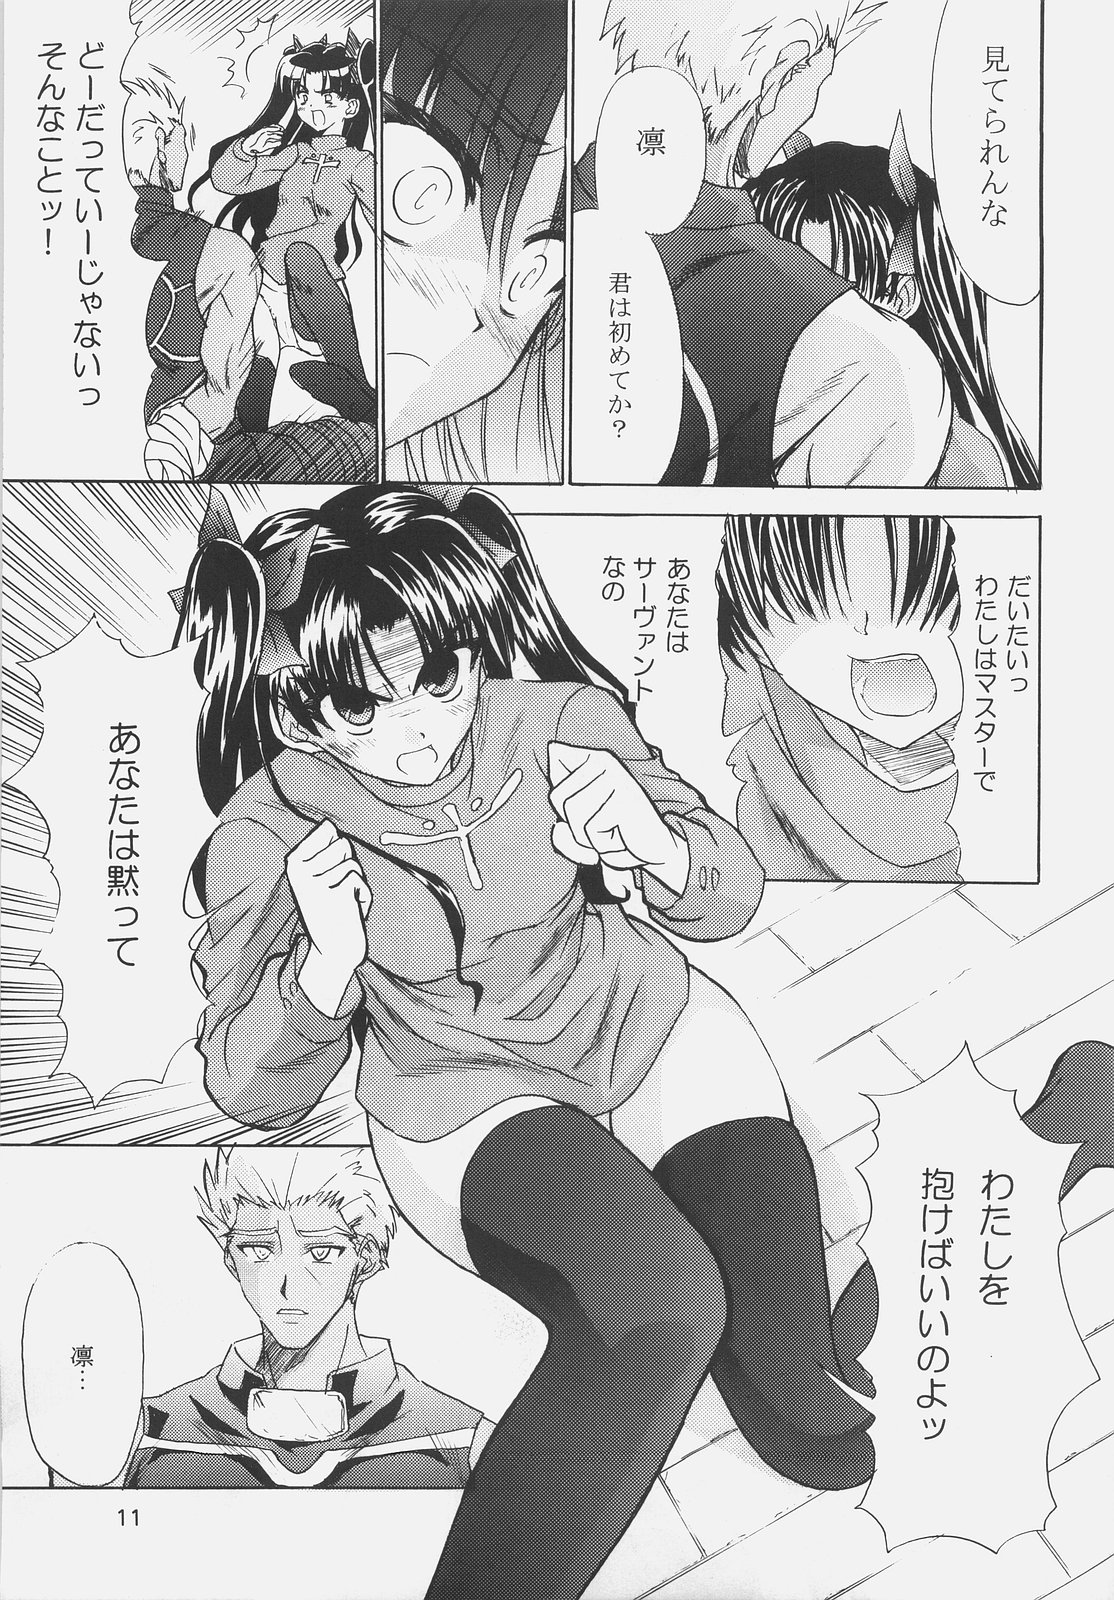 (SC31) [Yuzuriha (Aki, Poso)] Red and Red (Fate/stay night) (サンクリ31) [譲葉 (Aki, ぽそ)] Red and Red (Fate/stay night)